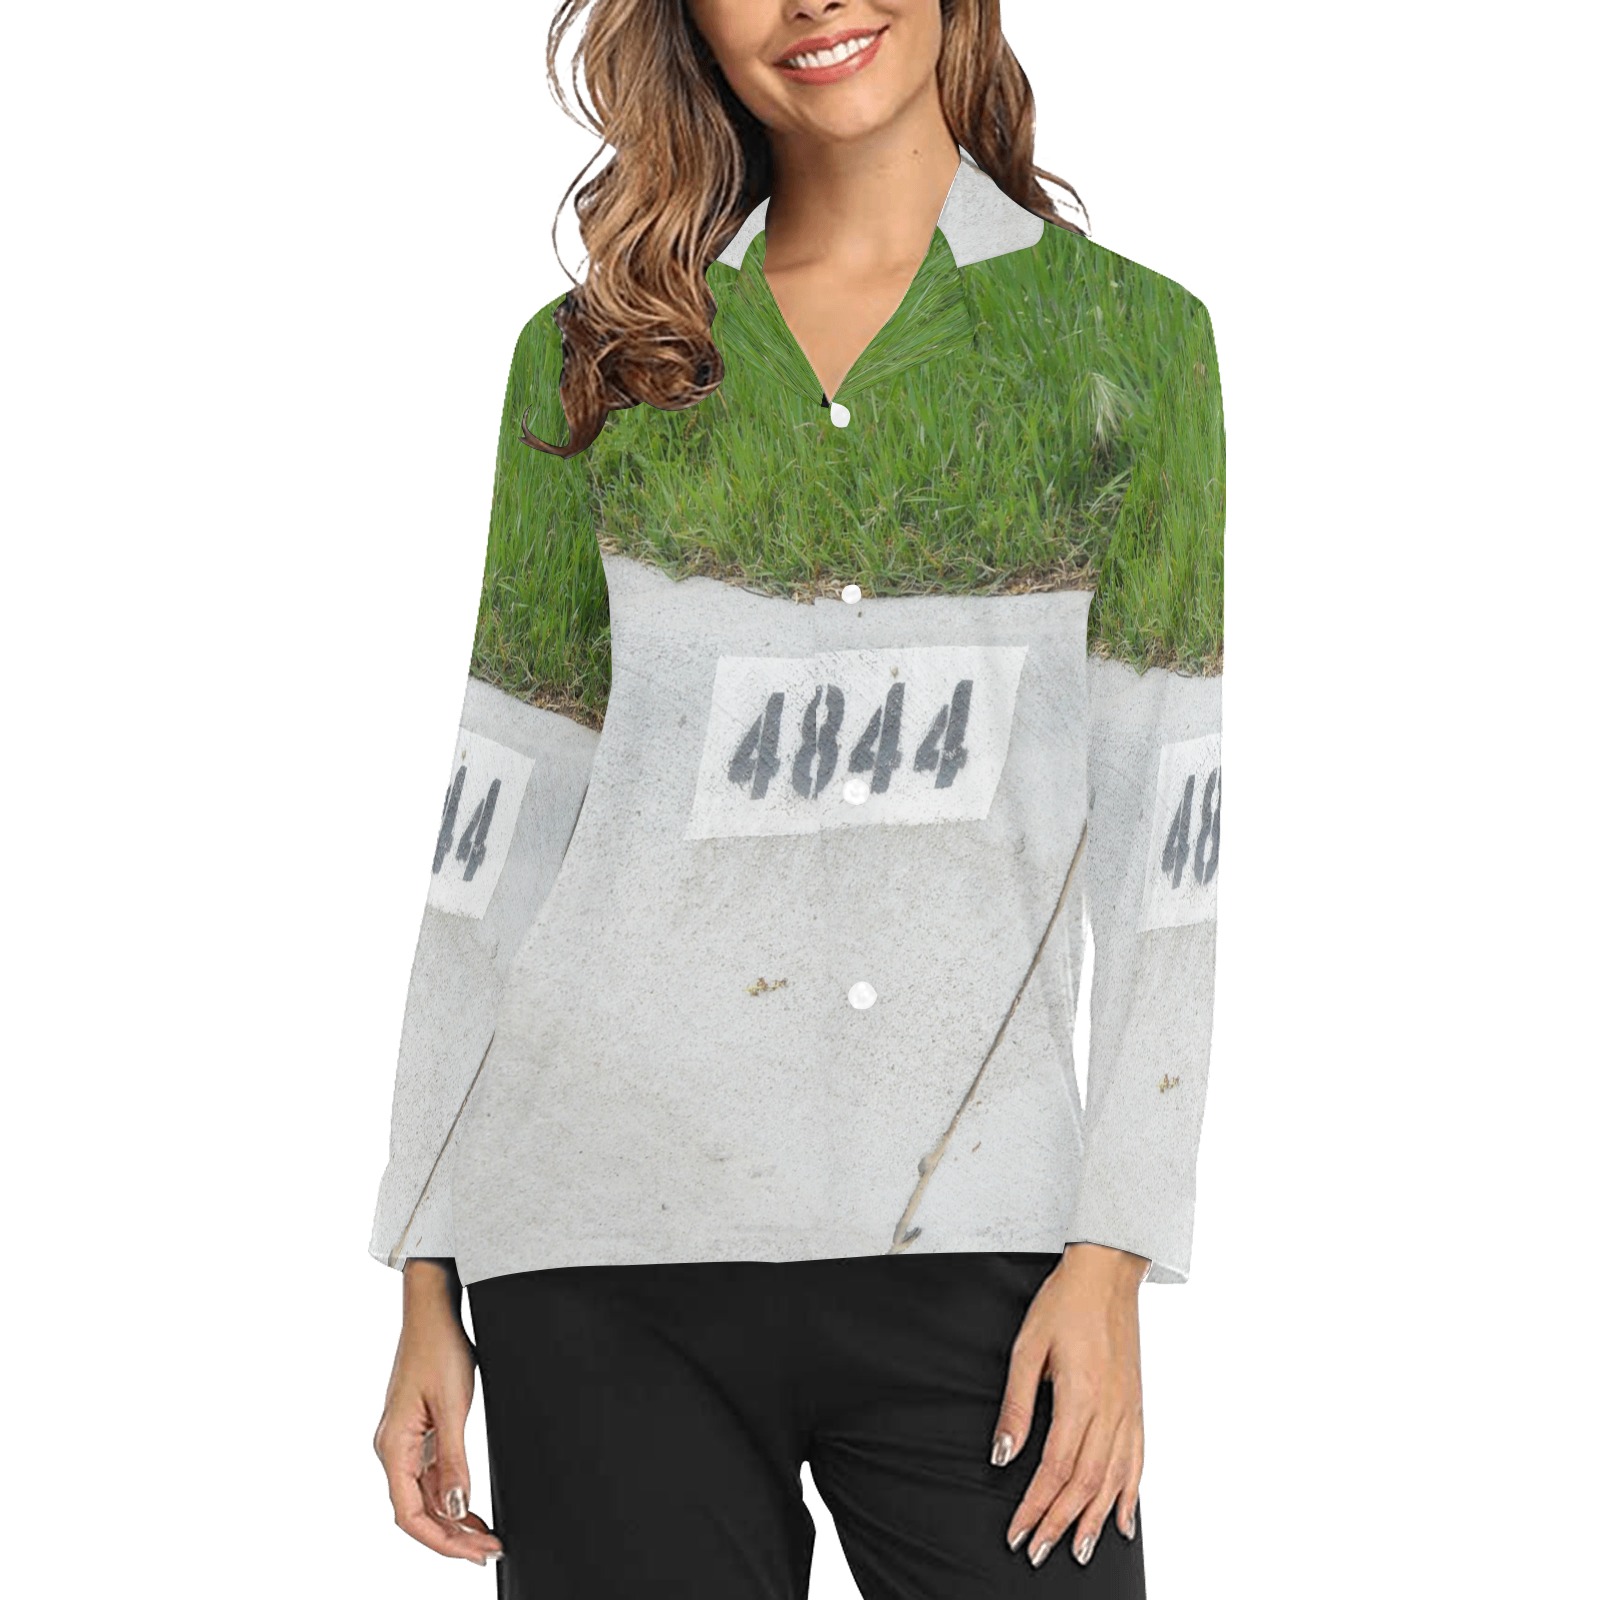 Street Number 4844 with White Buttons Women's Long Sleeve Pajama Shirt